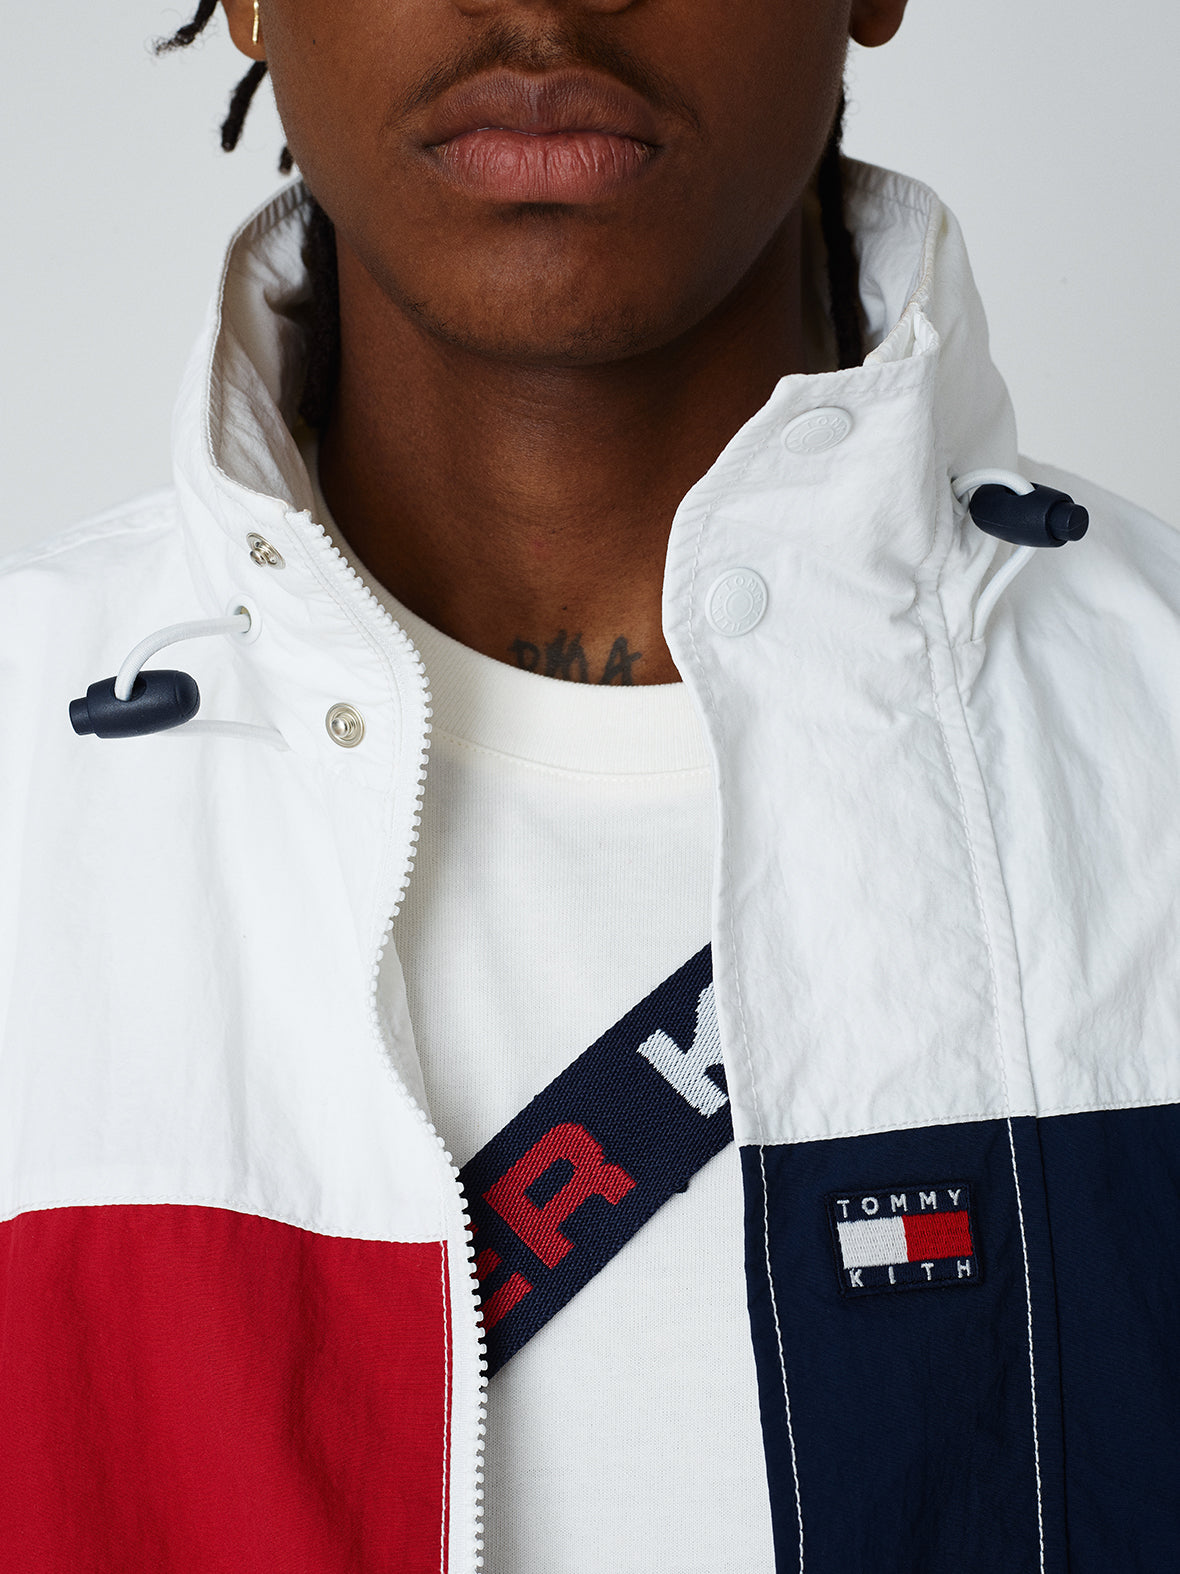 Kith for Tommy Hilfiger SS19 Lookbook